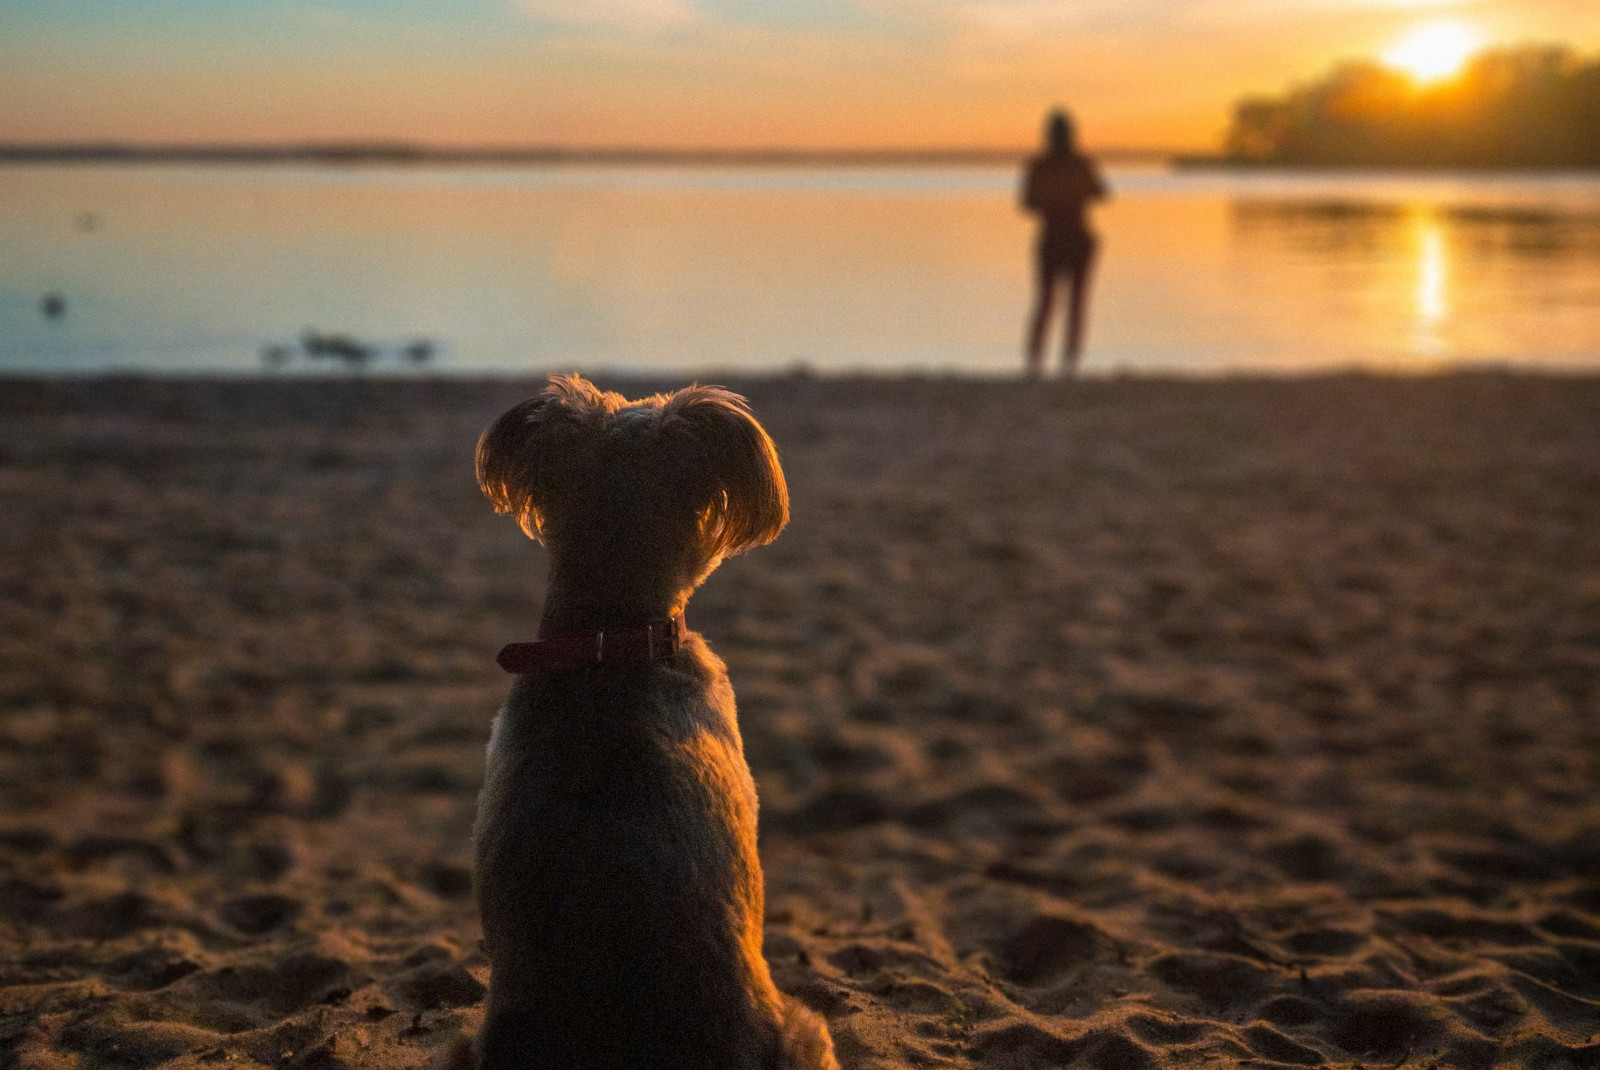 Dog sits on beach with person in the background as the sun sets